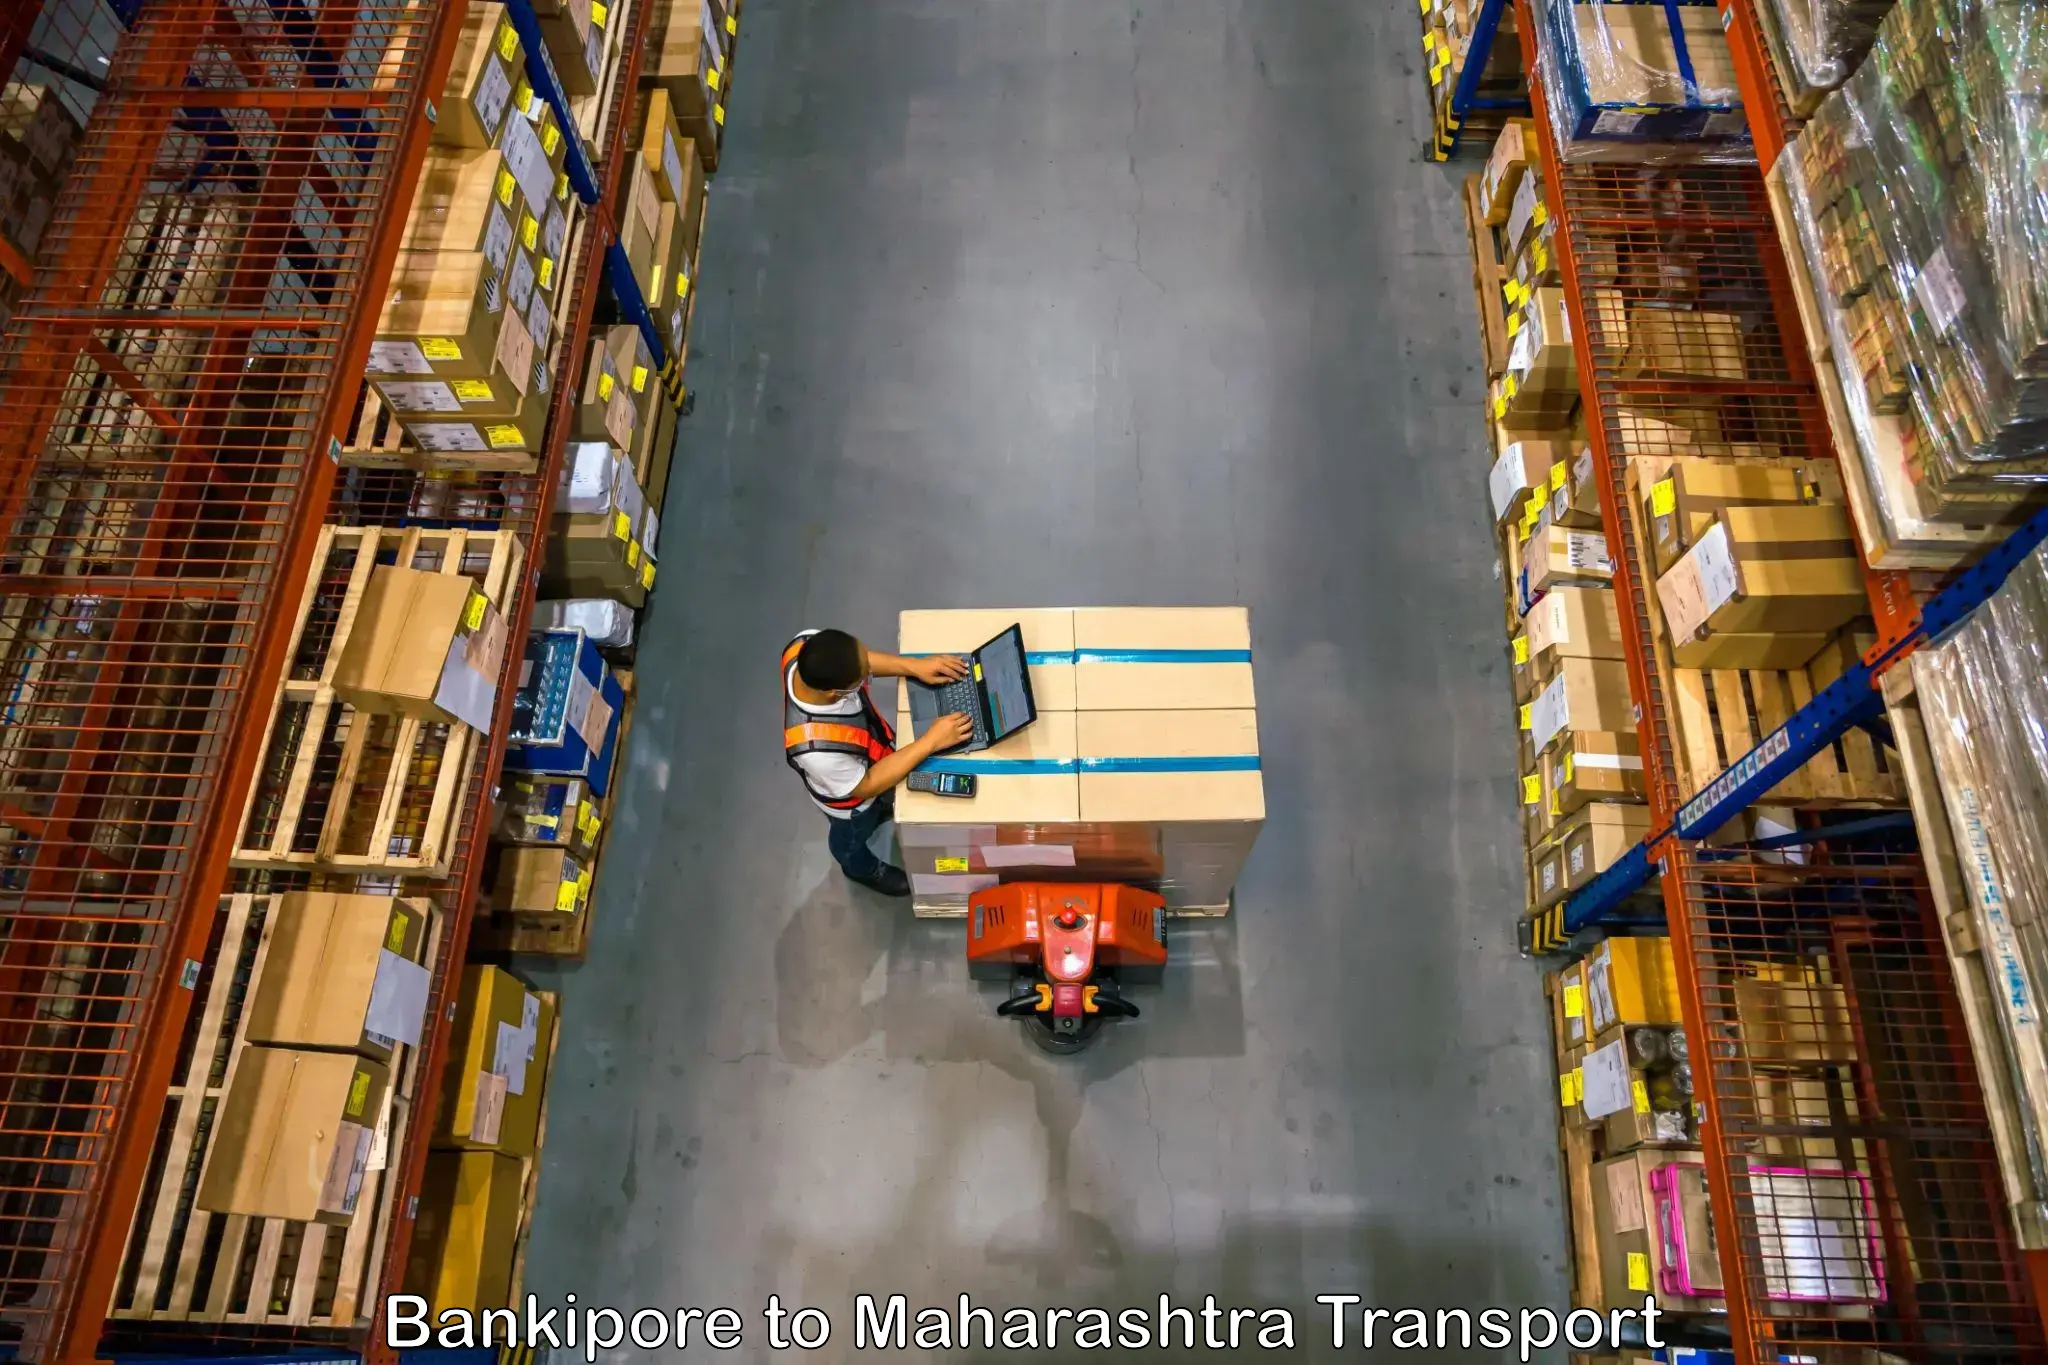 Truck transport companies in India Bankipore to Degloor